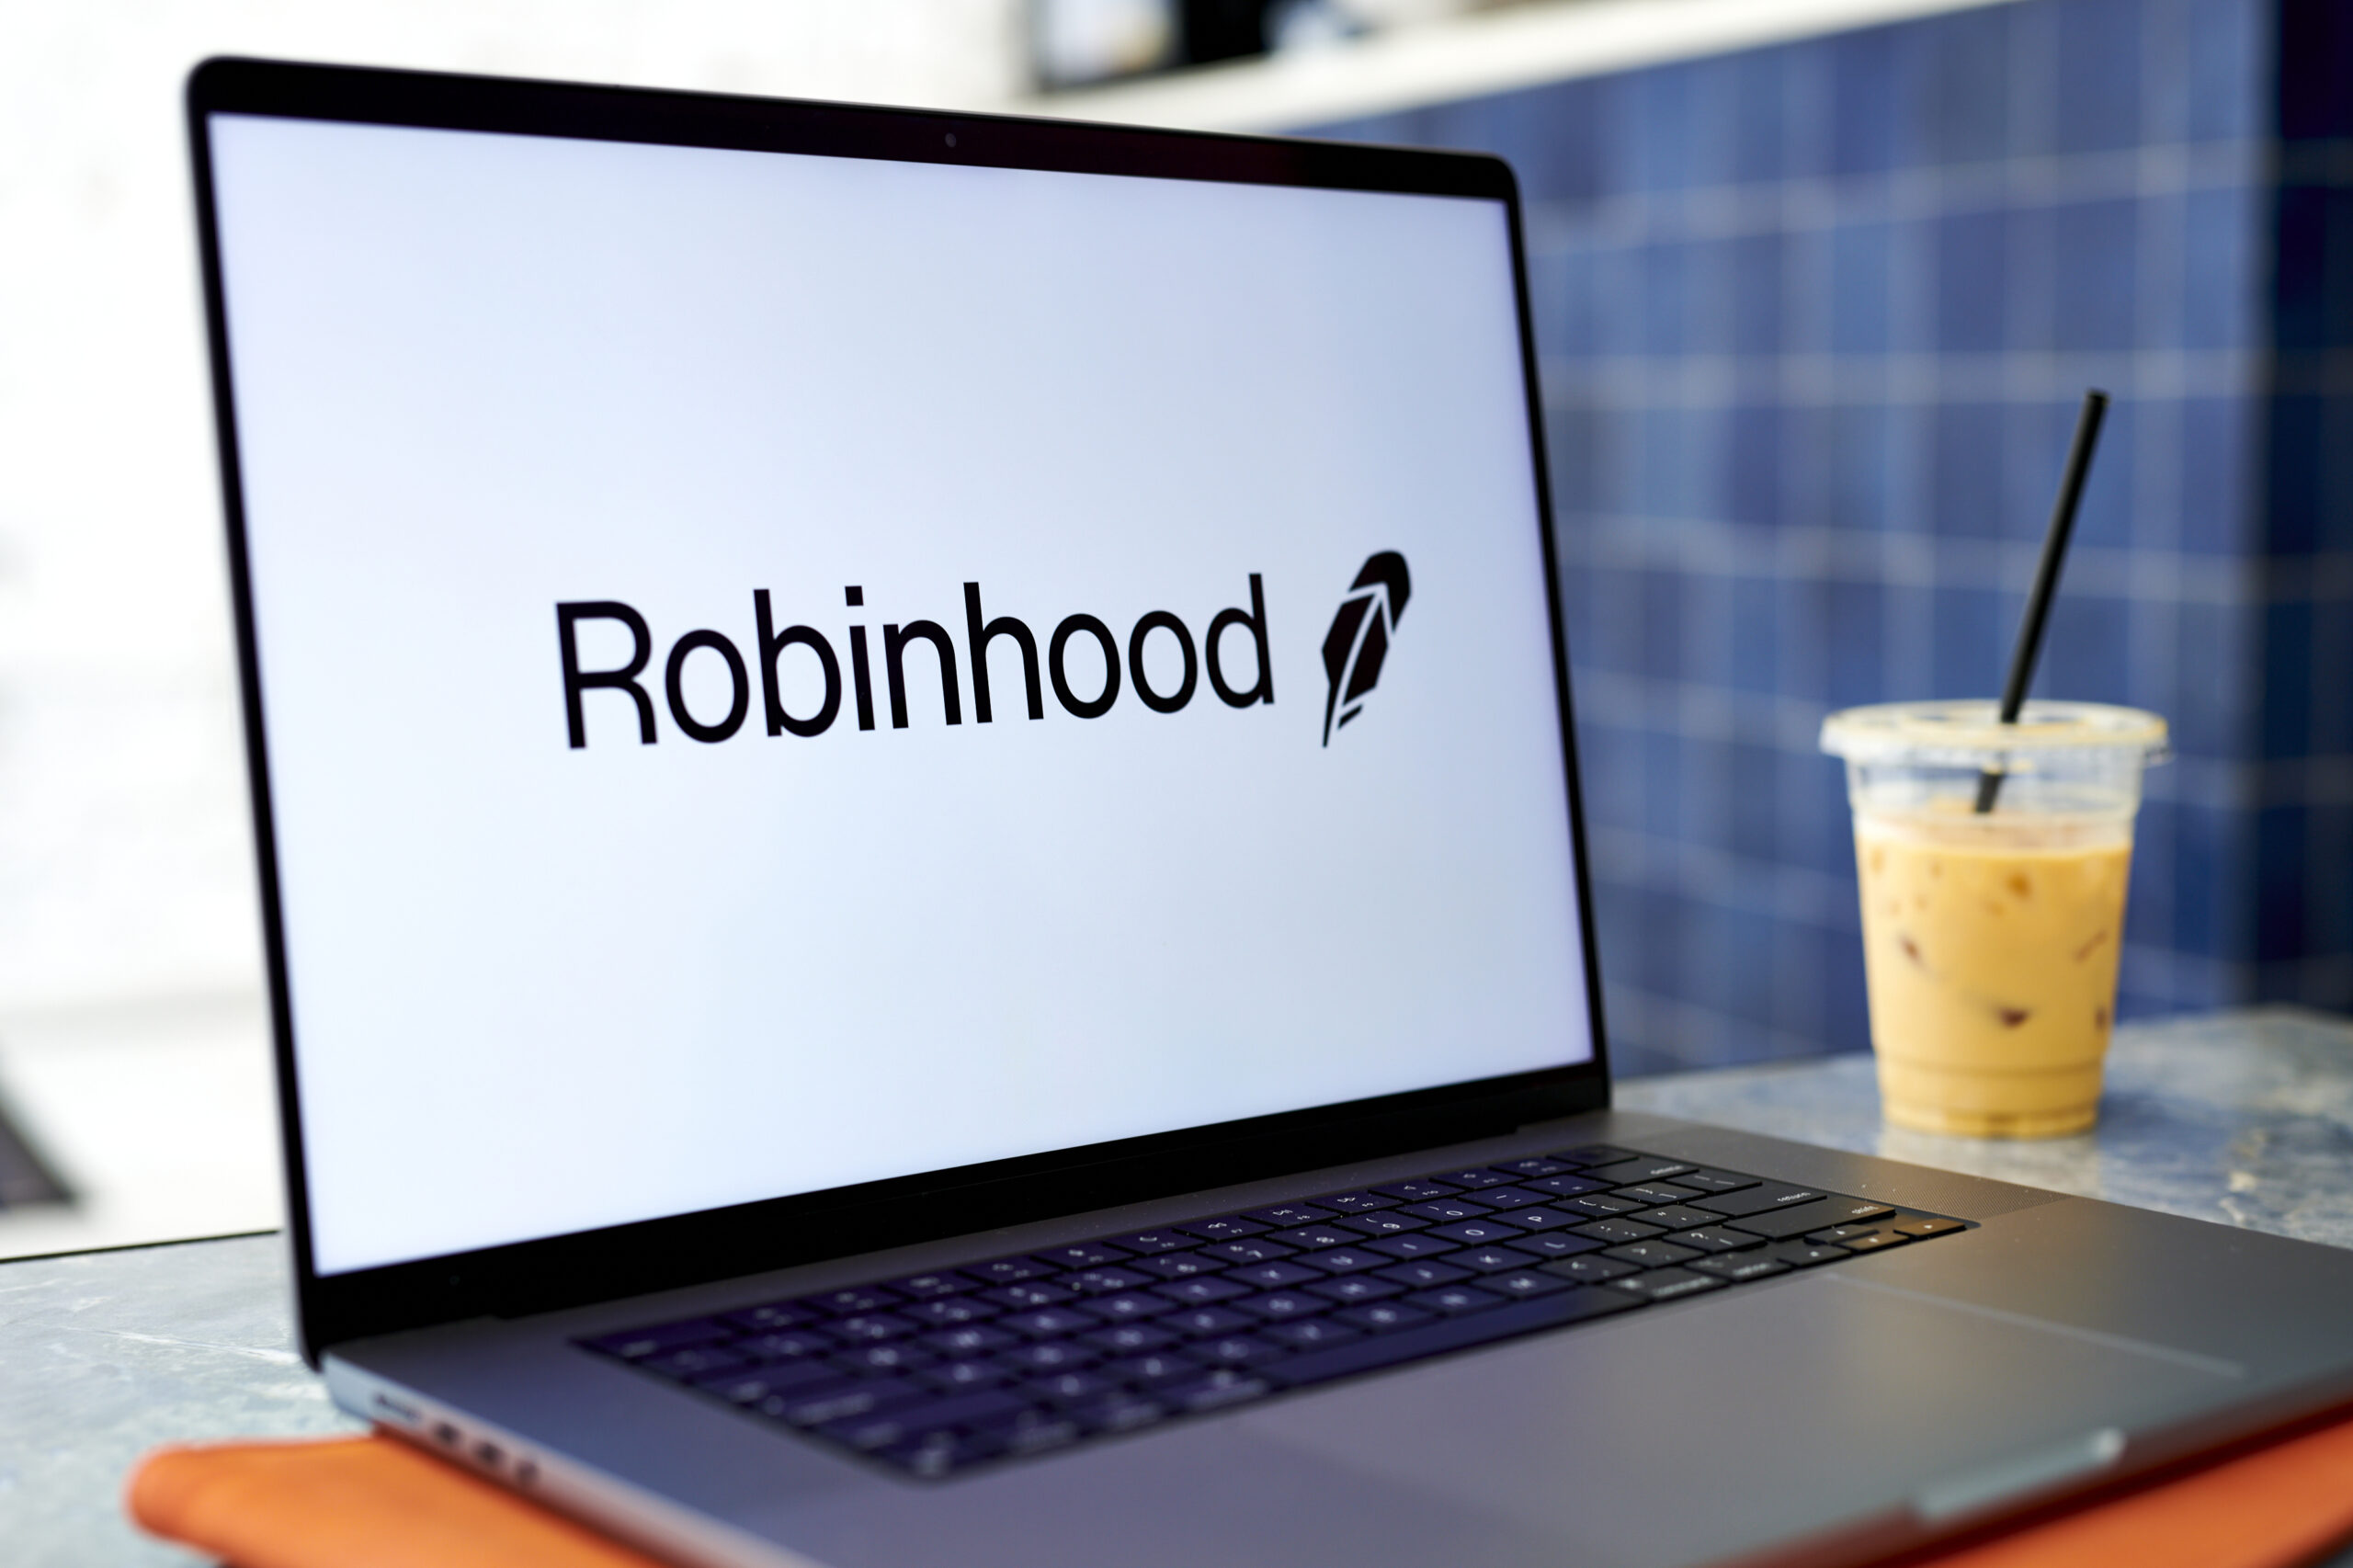 Robinhood’s Crypto Business Under Threat of Lawsuit, SEC Warns